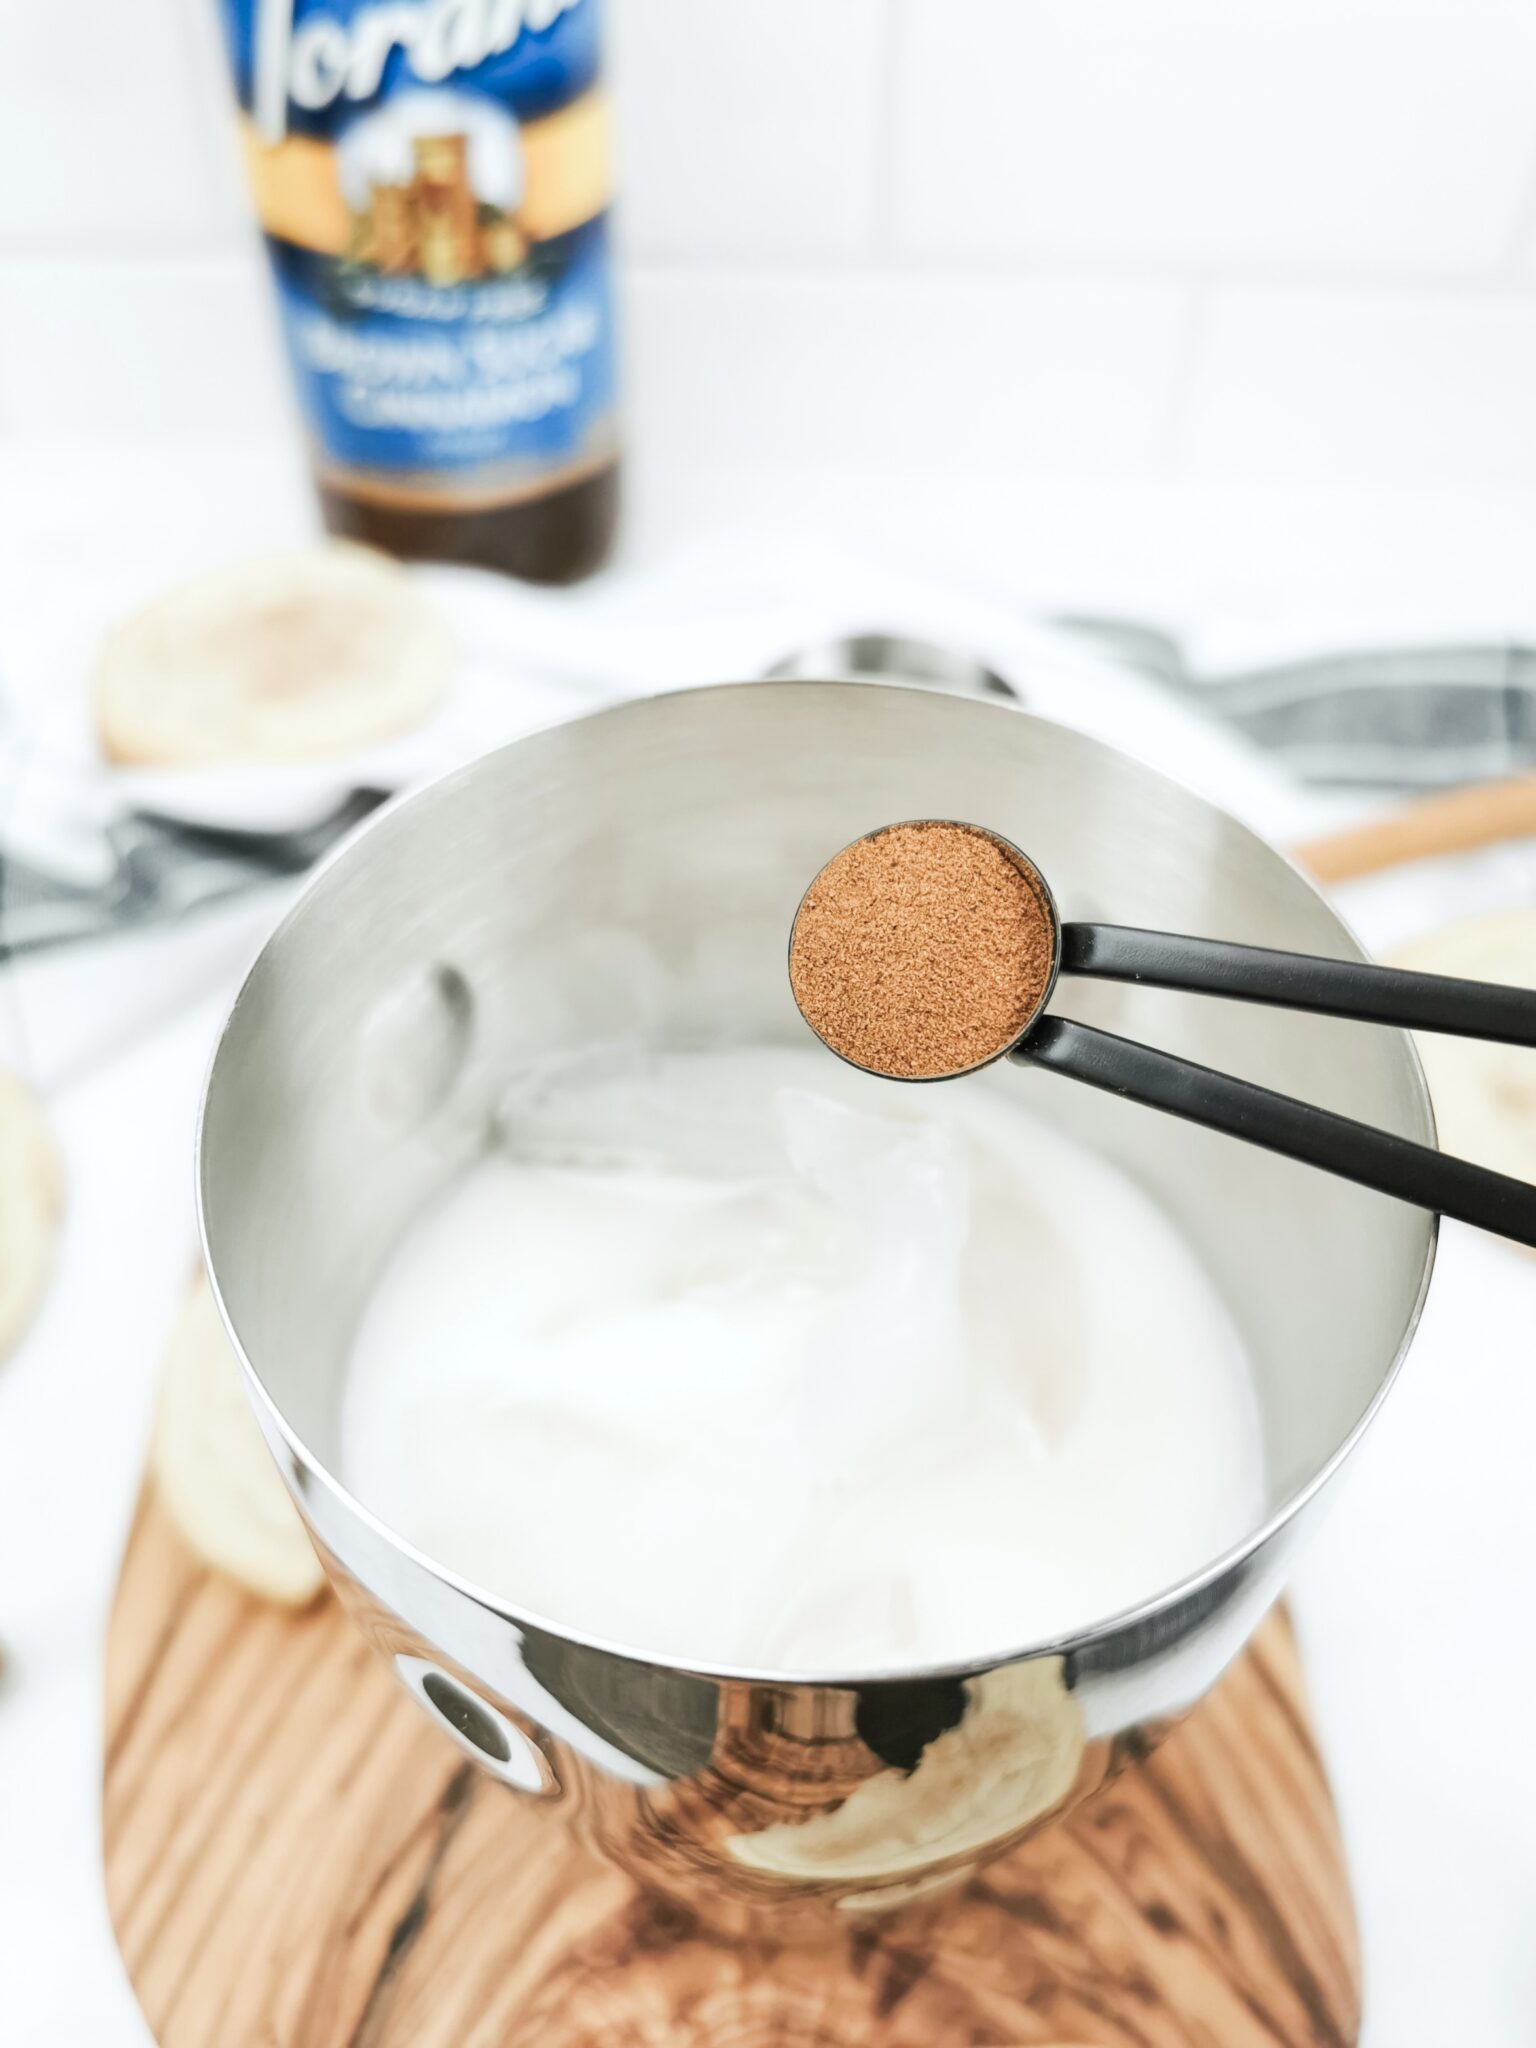 A 1/4 teaspoon of cinnamon is being poured into a drink shaker to make a Caramel Snickerdoodle Mocktail.